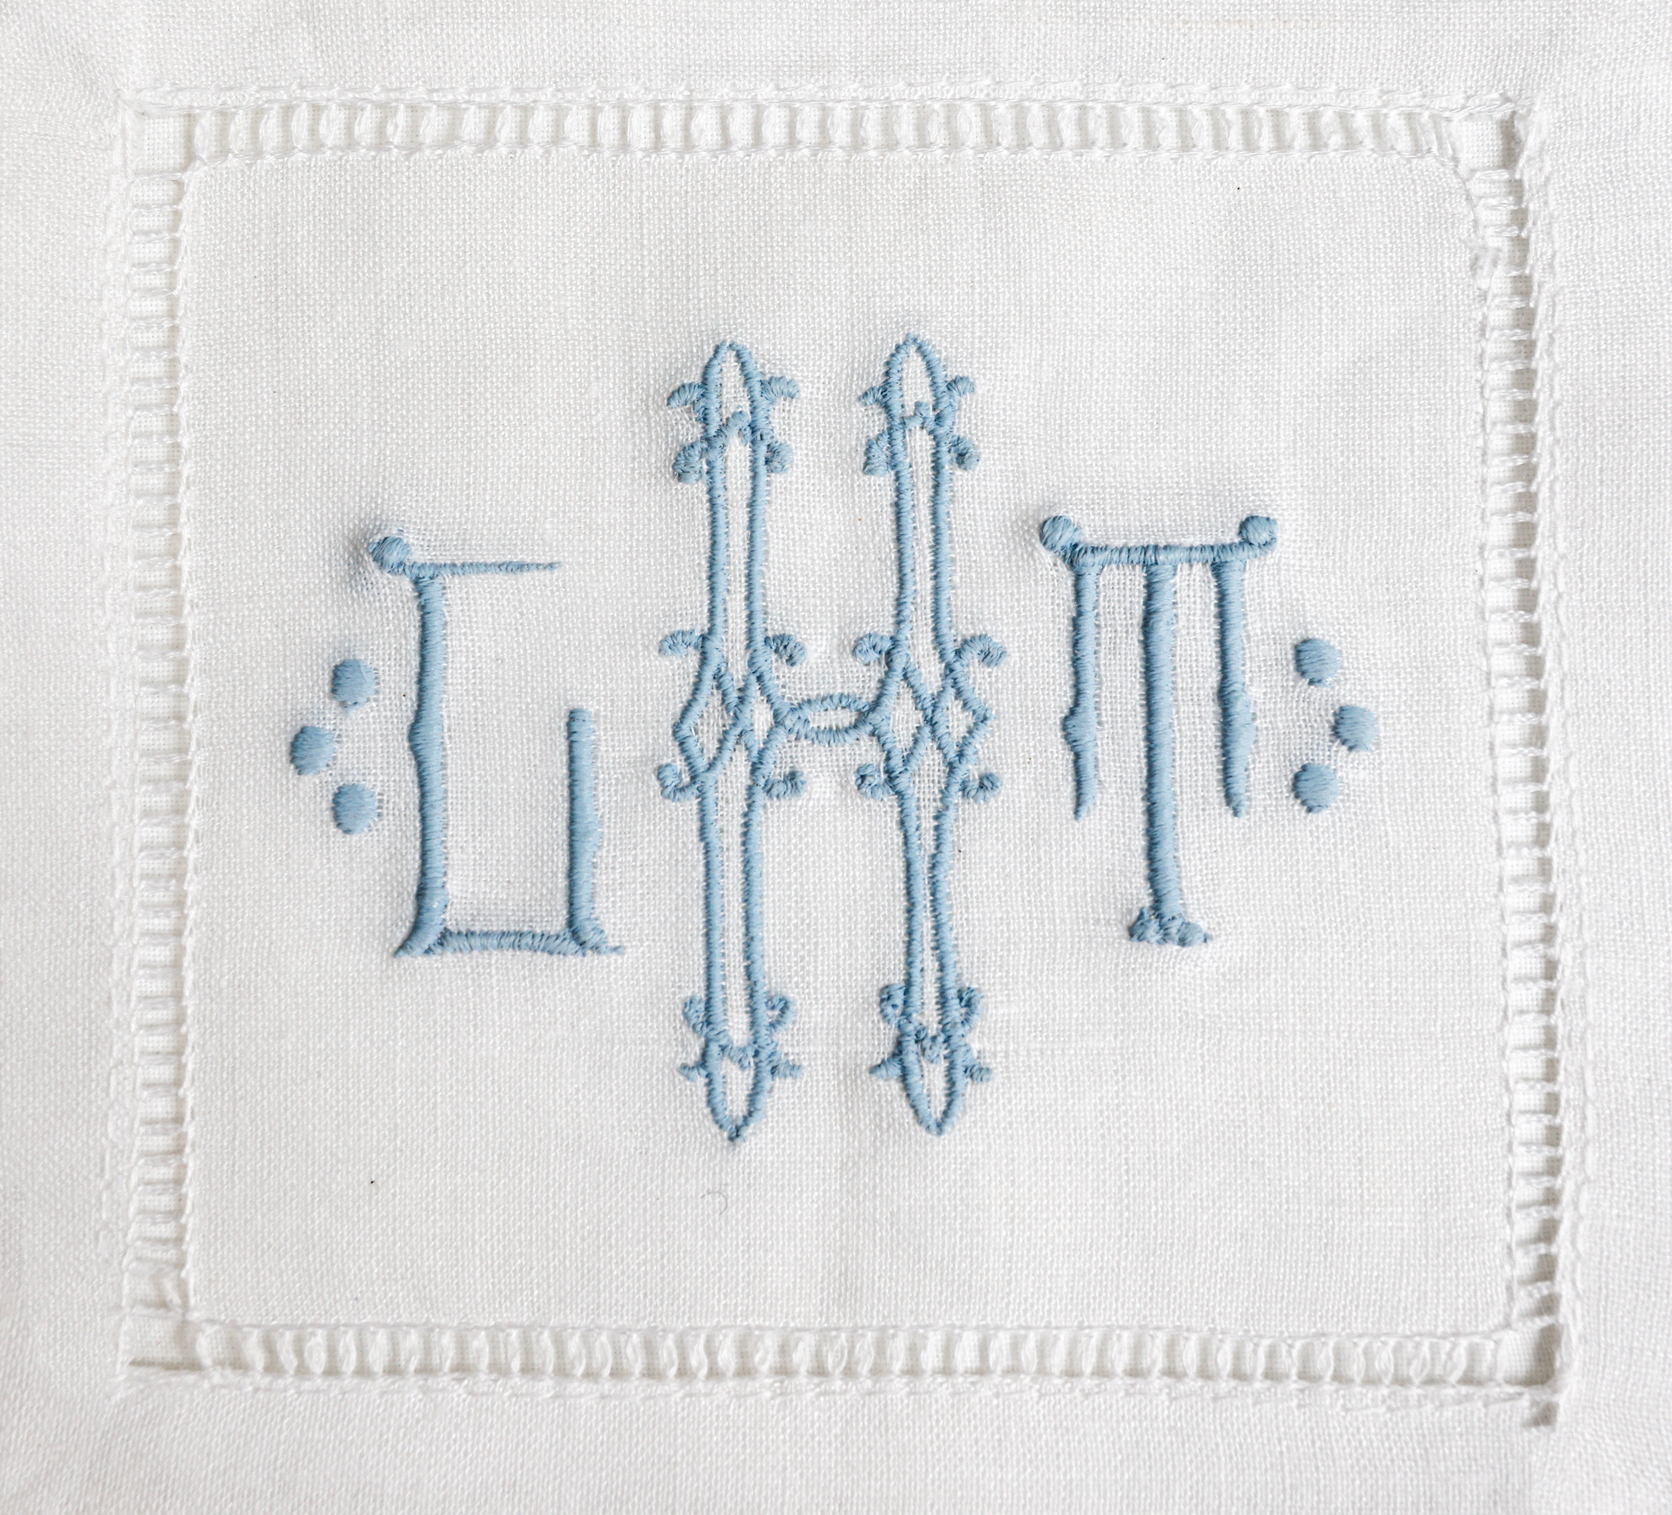 Caroline Matthews, the seamstress behind Duke and Duchess Monograms, employs the use of a home embroidery machine to create timeless designs in a fraction of the time it takes to produce a hand embroidered equivalent. Caroline describes the preliminary design selection as extremely personal as a lot of steps are involved in finding the right monogram. While Caroline carries a small collection of ready-to-embroider goods, she also allows clients to bring their own pieces.